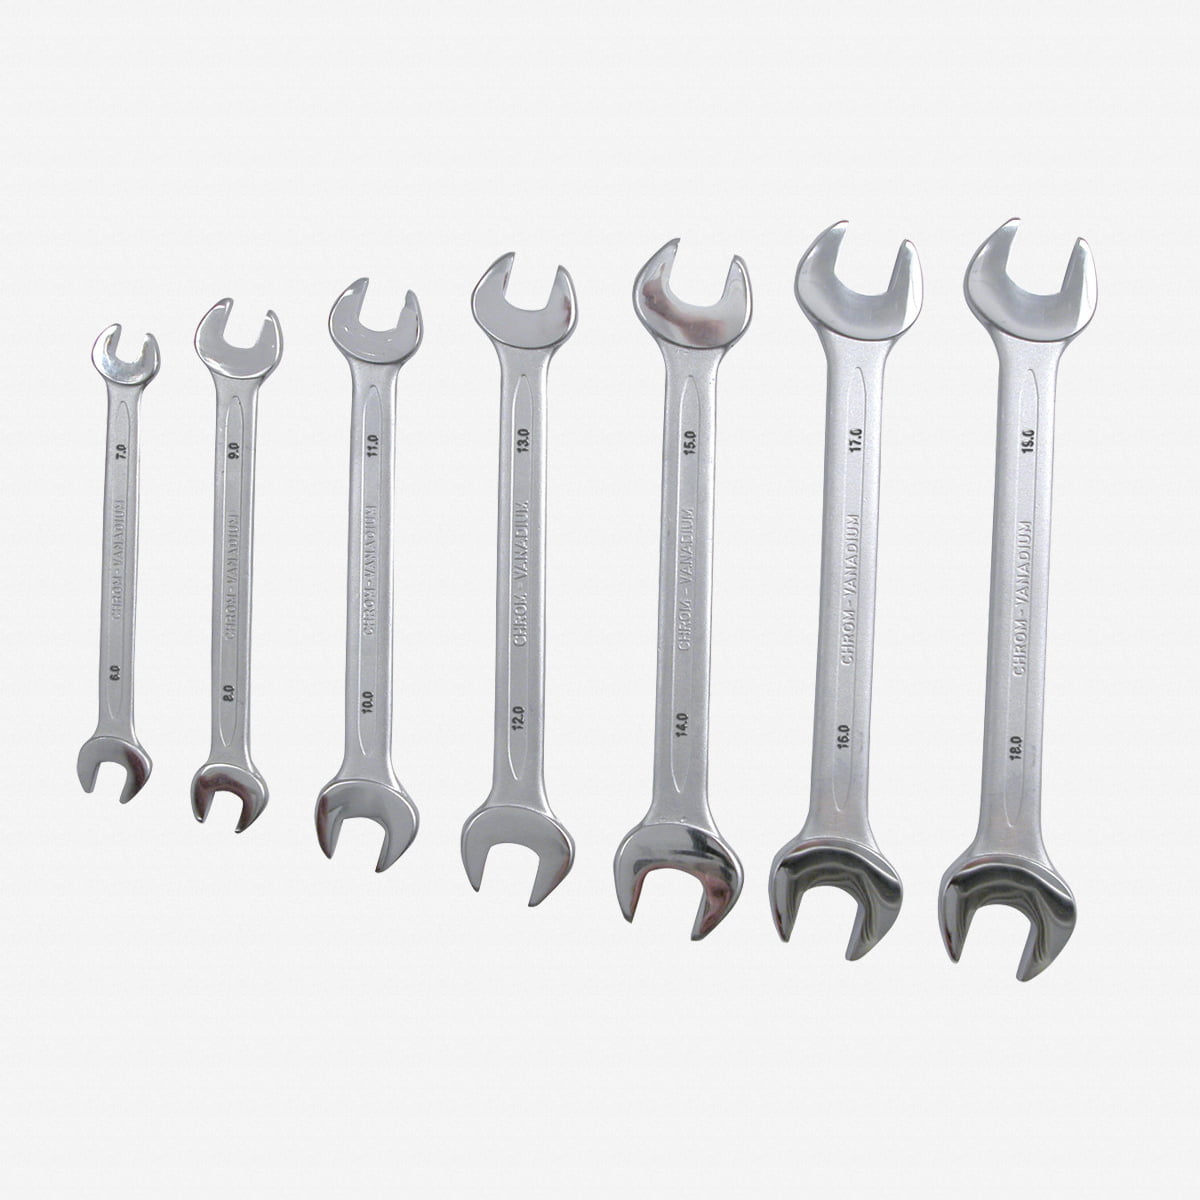 Metric Open End Wrench 12.0mm Head Size 